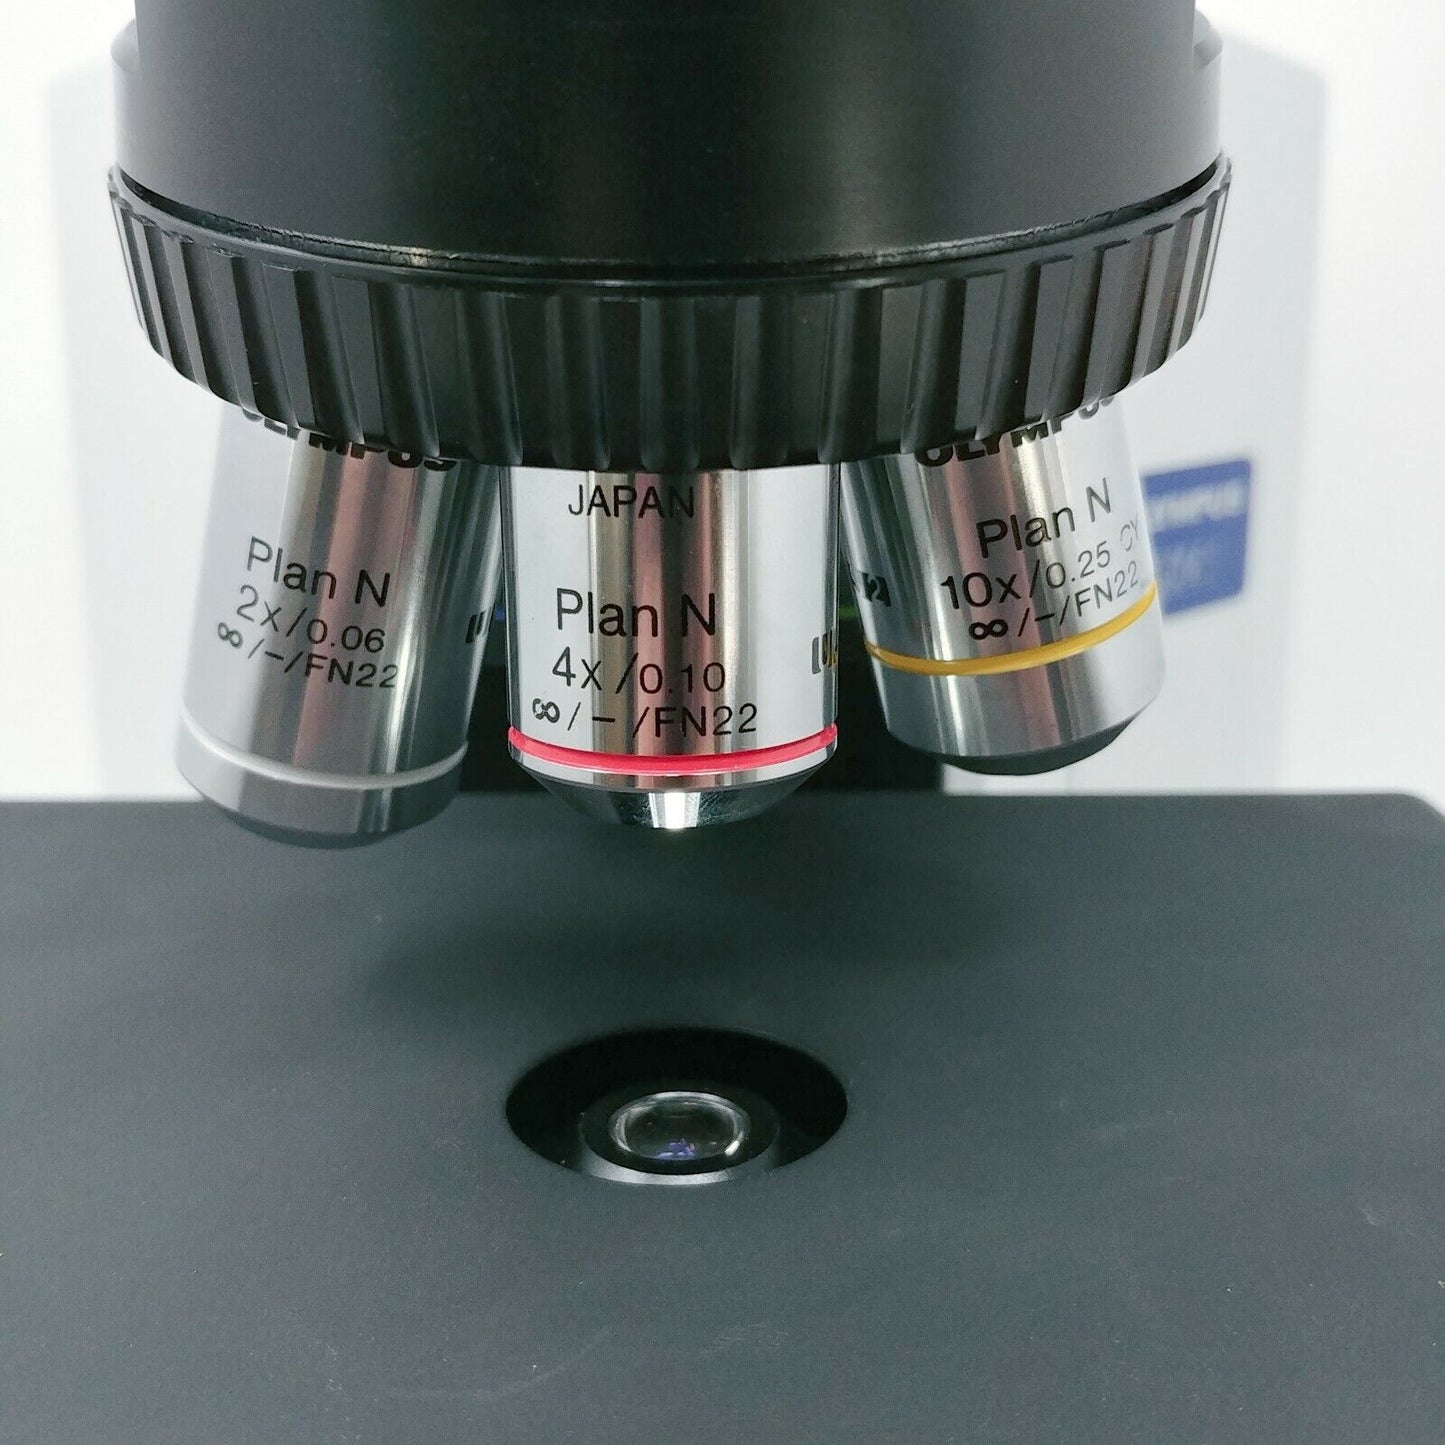 Olympus Microscopes Mohs Lab Package BX41 LED with U-TRUS Camera Port and BH2 - microscopemarketplace